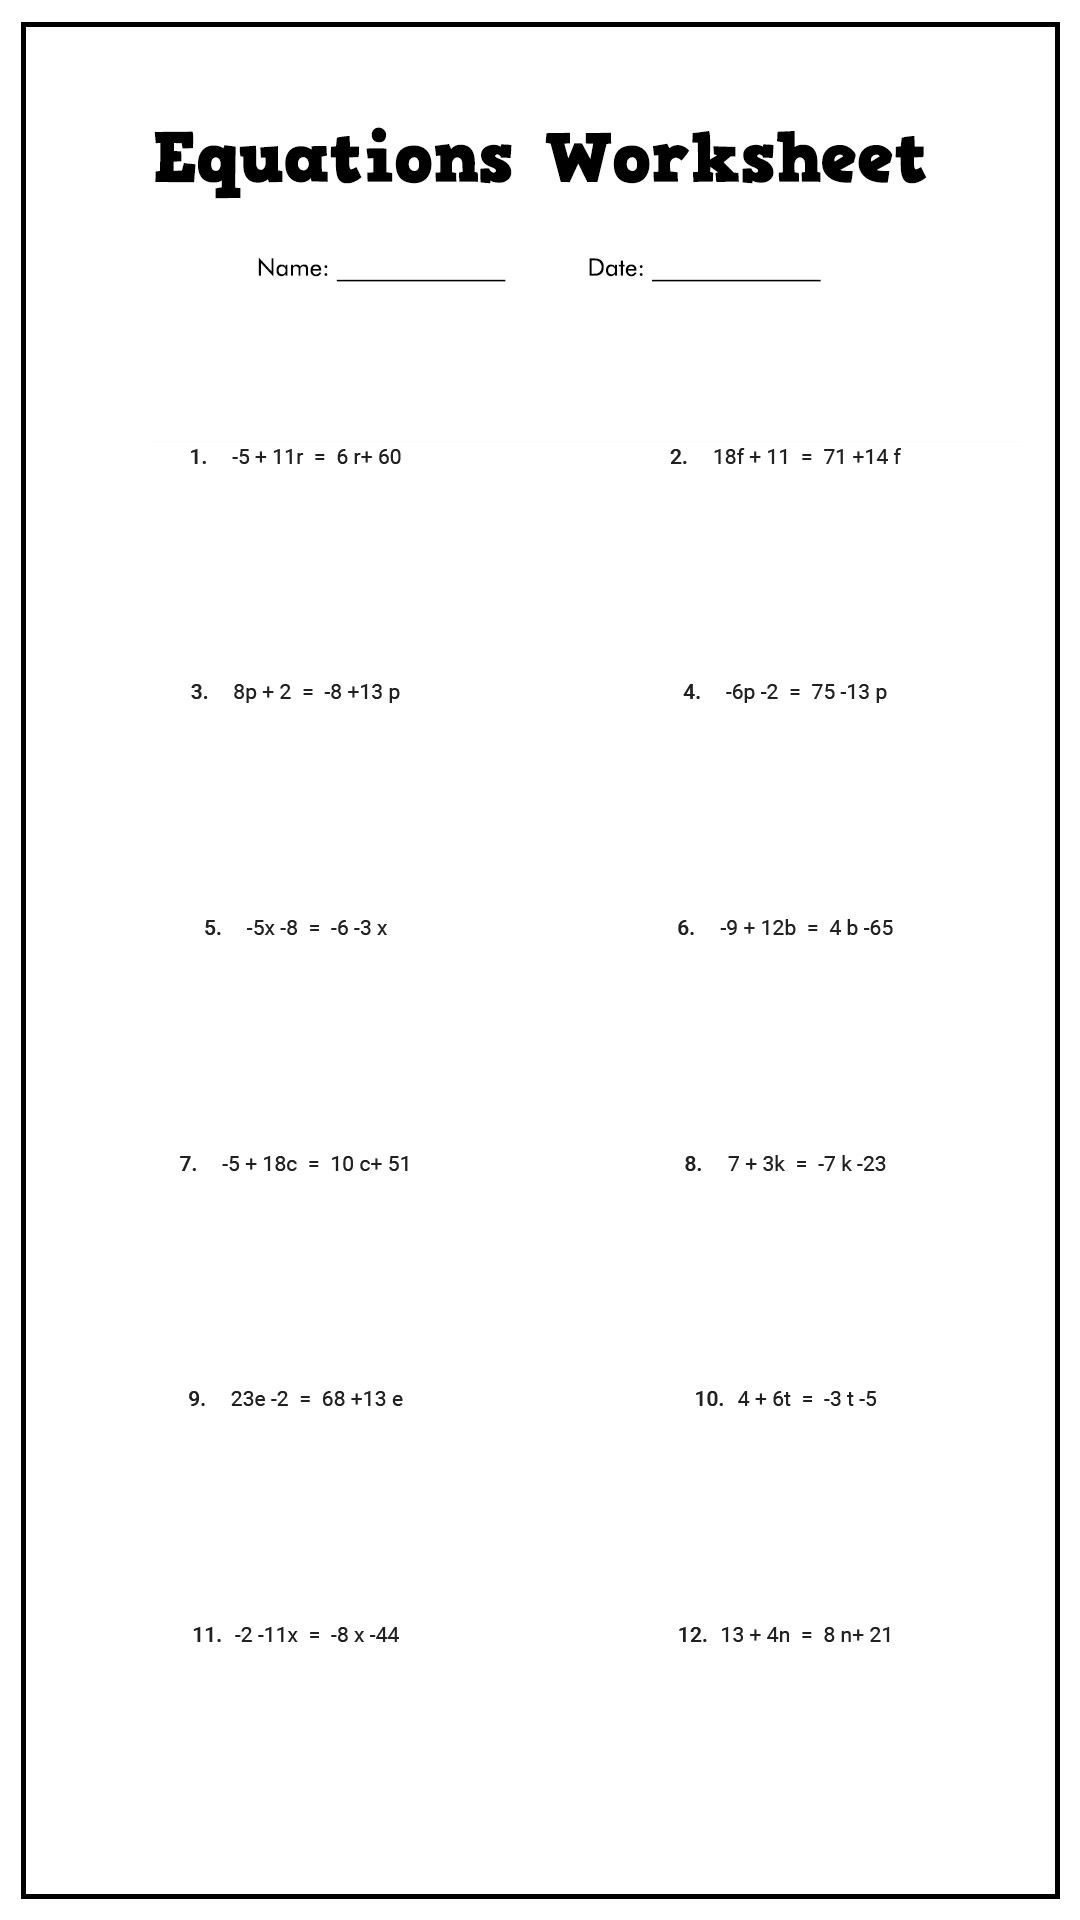 Two-Step Equations Worksheet Image